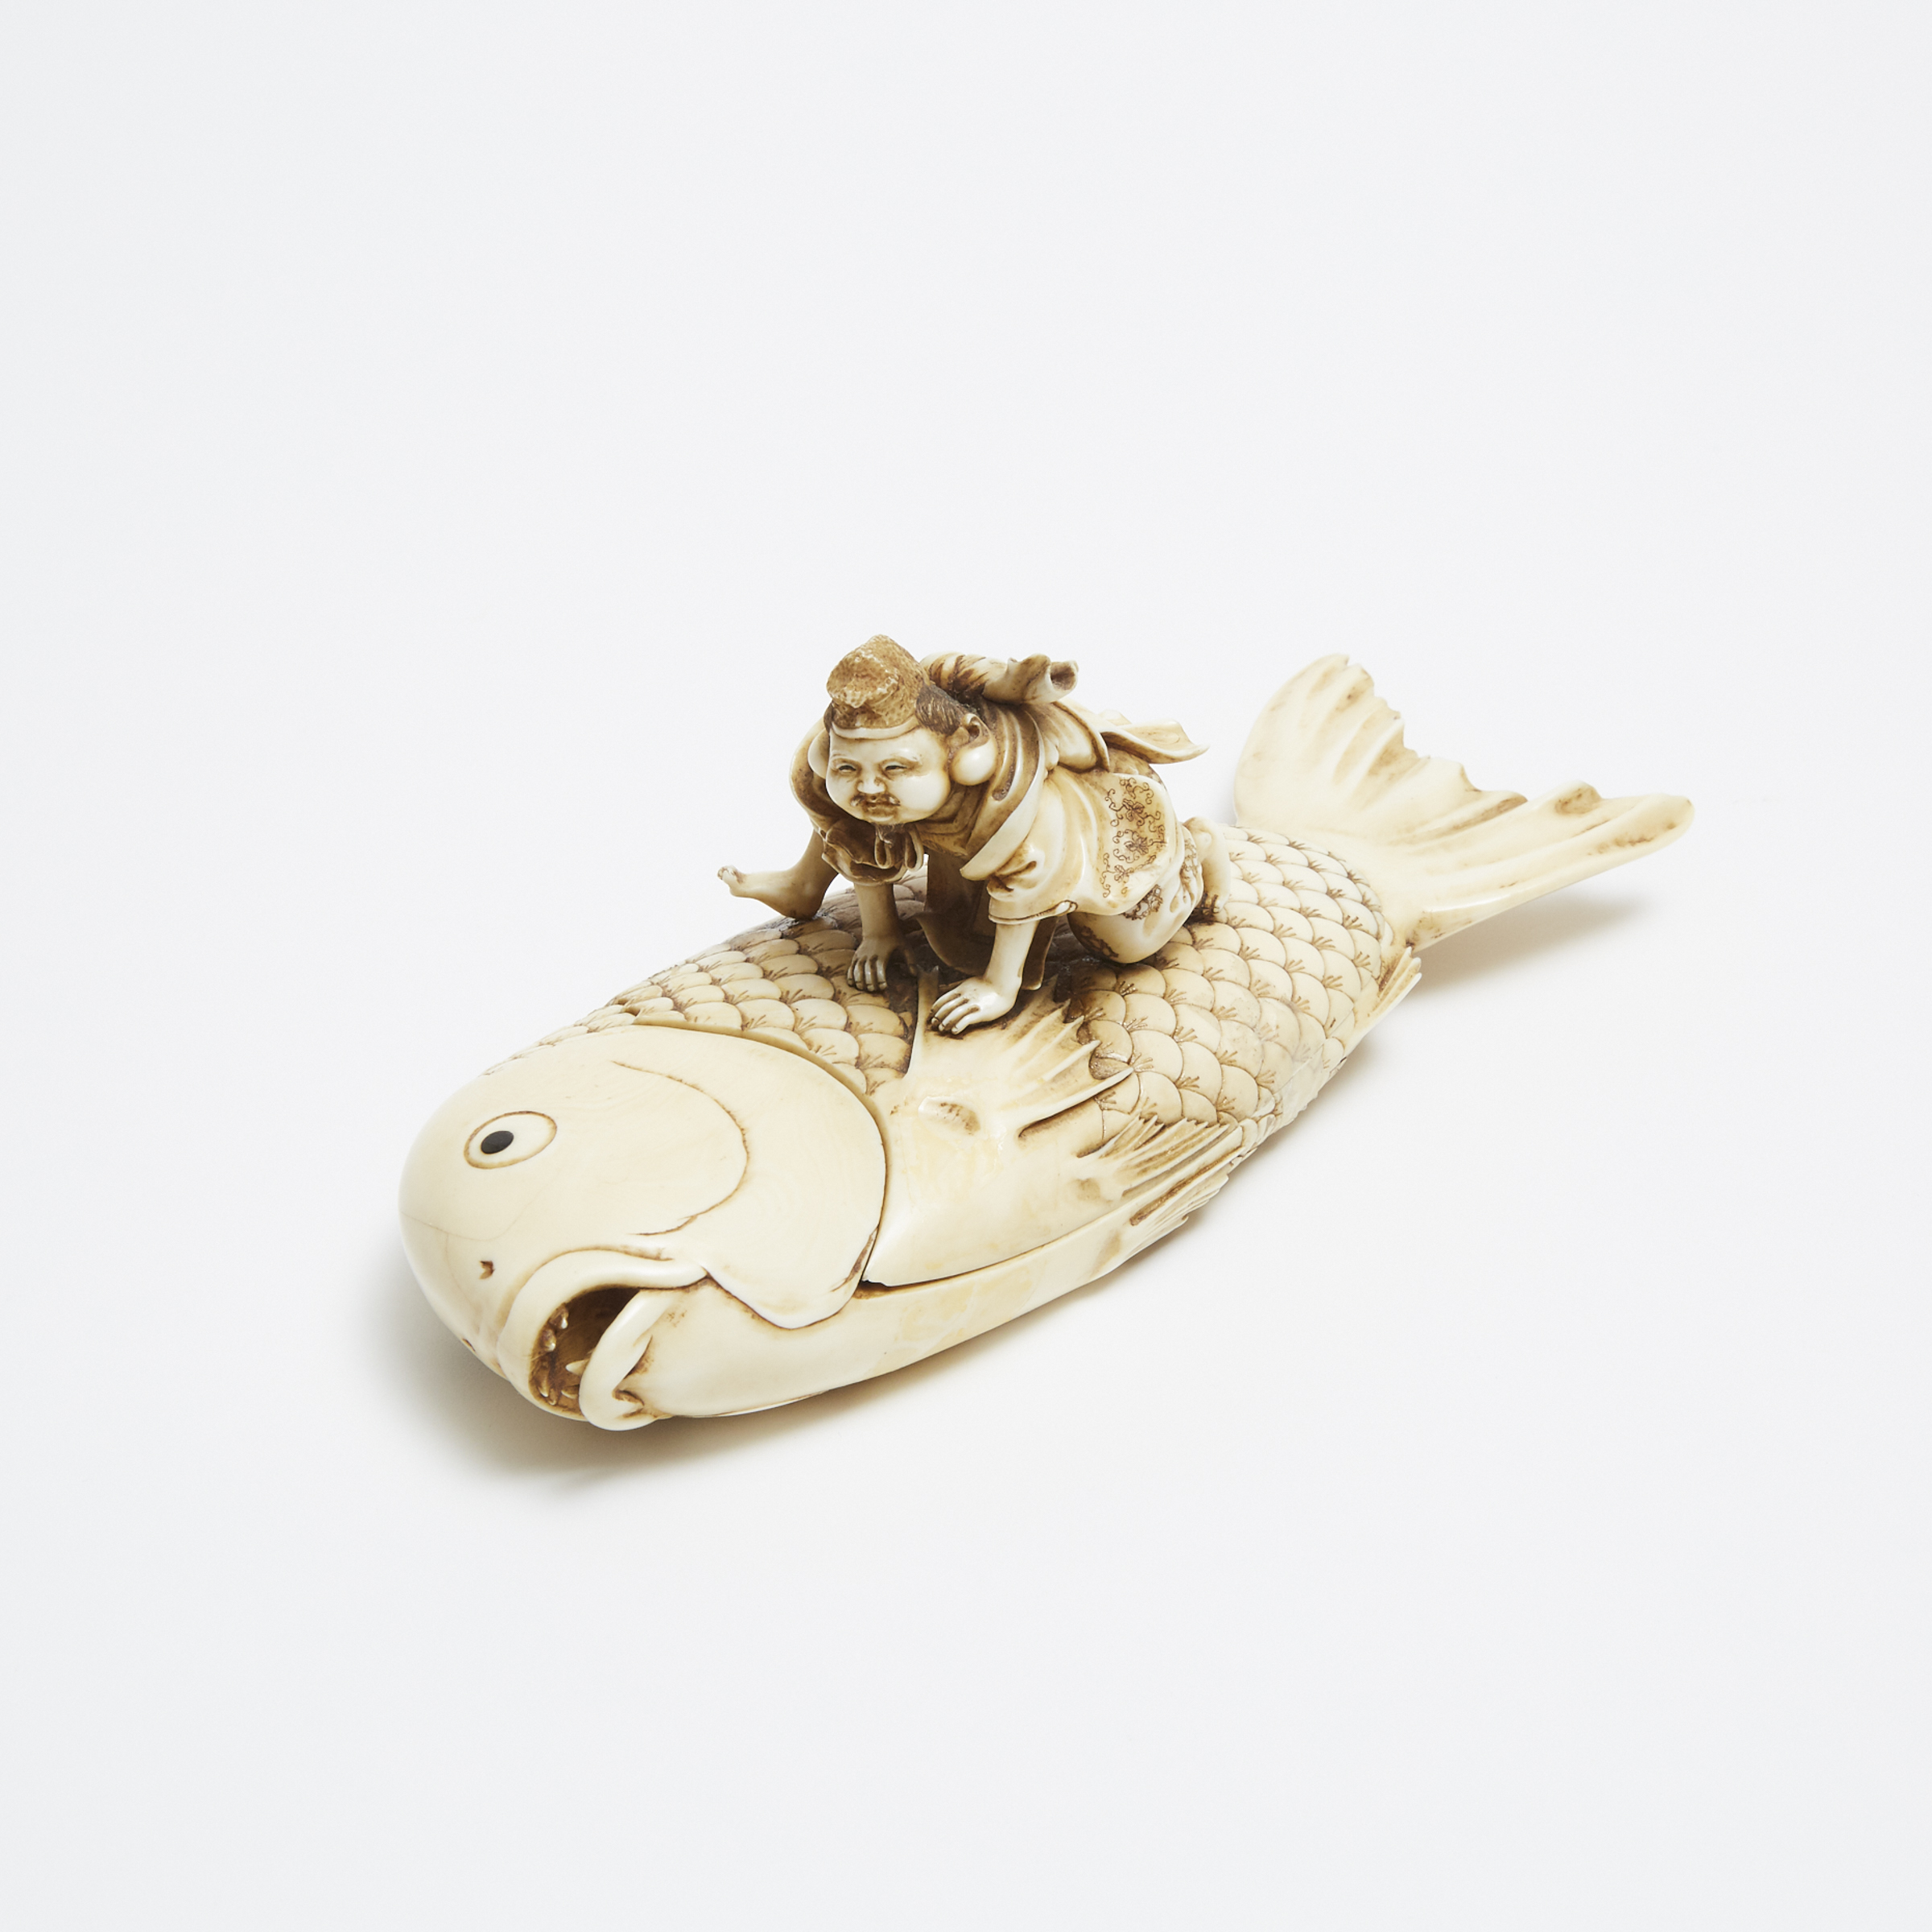 An Ivory Carved Box of Ebisu Riding a Giant Sea Bream